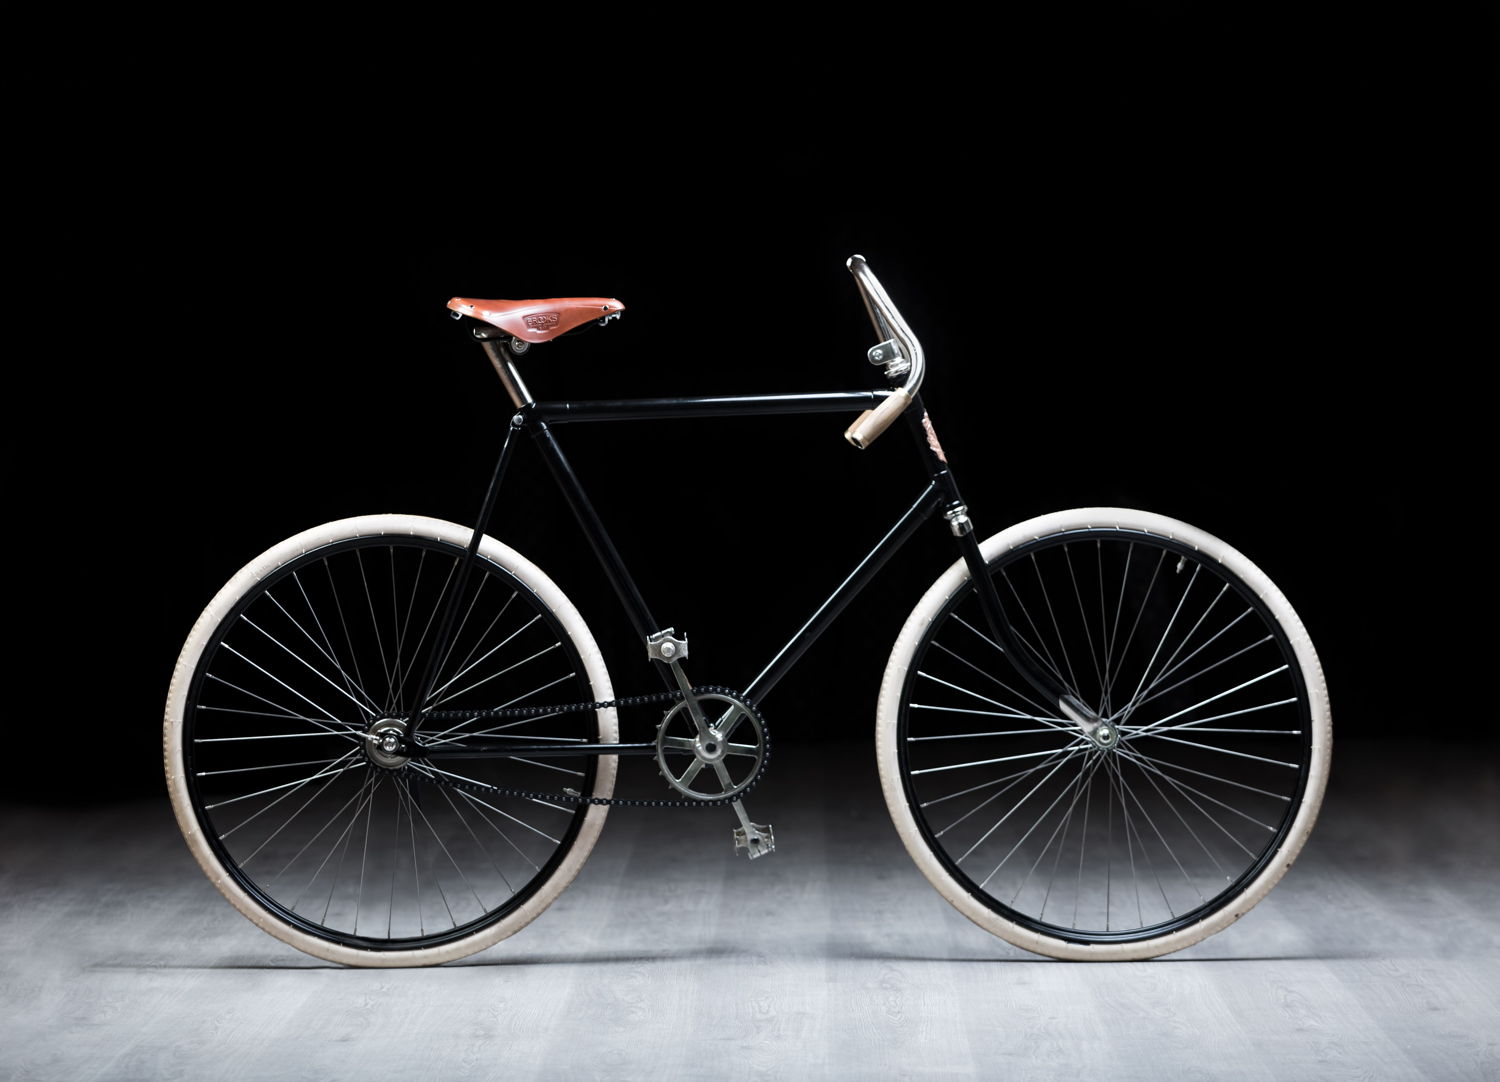 The fully functional replica of the SLAVIA bicycle from 1896
commemorates the first product that company founders Václav Laurin
and Václav Klement manufactured; ŠKODA AUTO has been a pioneer of
individual mobility for 125 years.